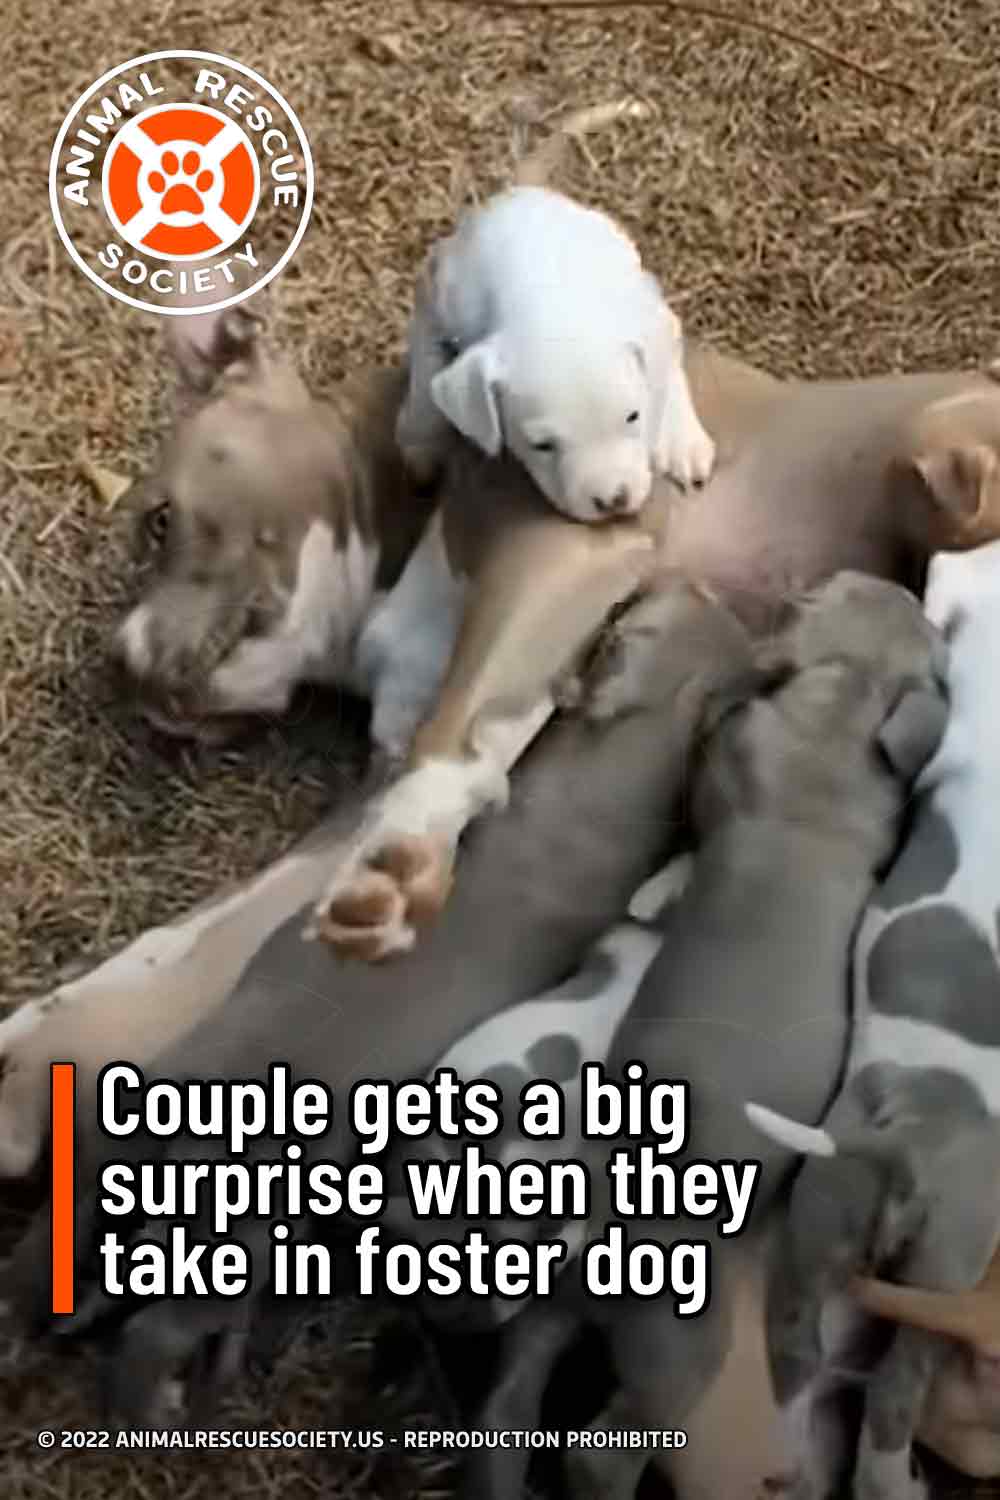 Couple gets a big surprise when they take in foster dog